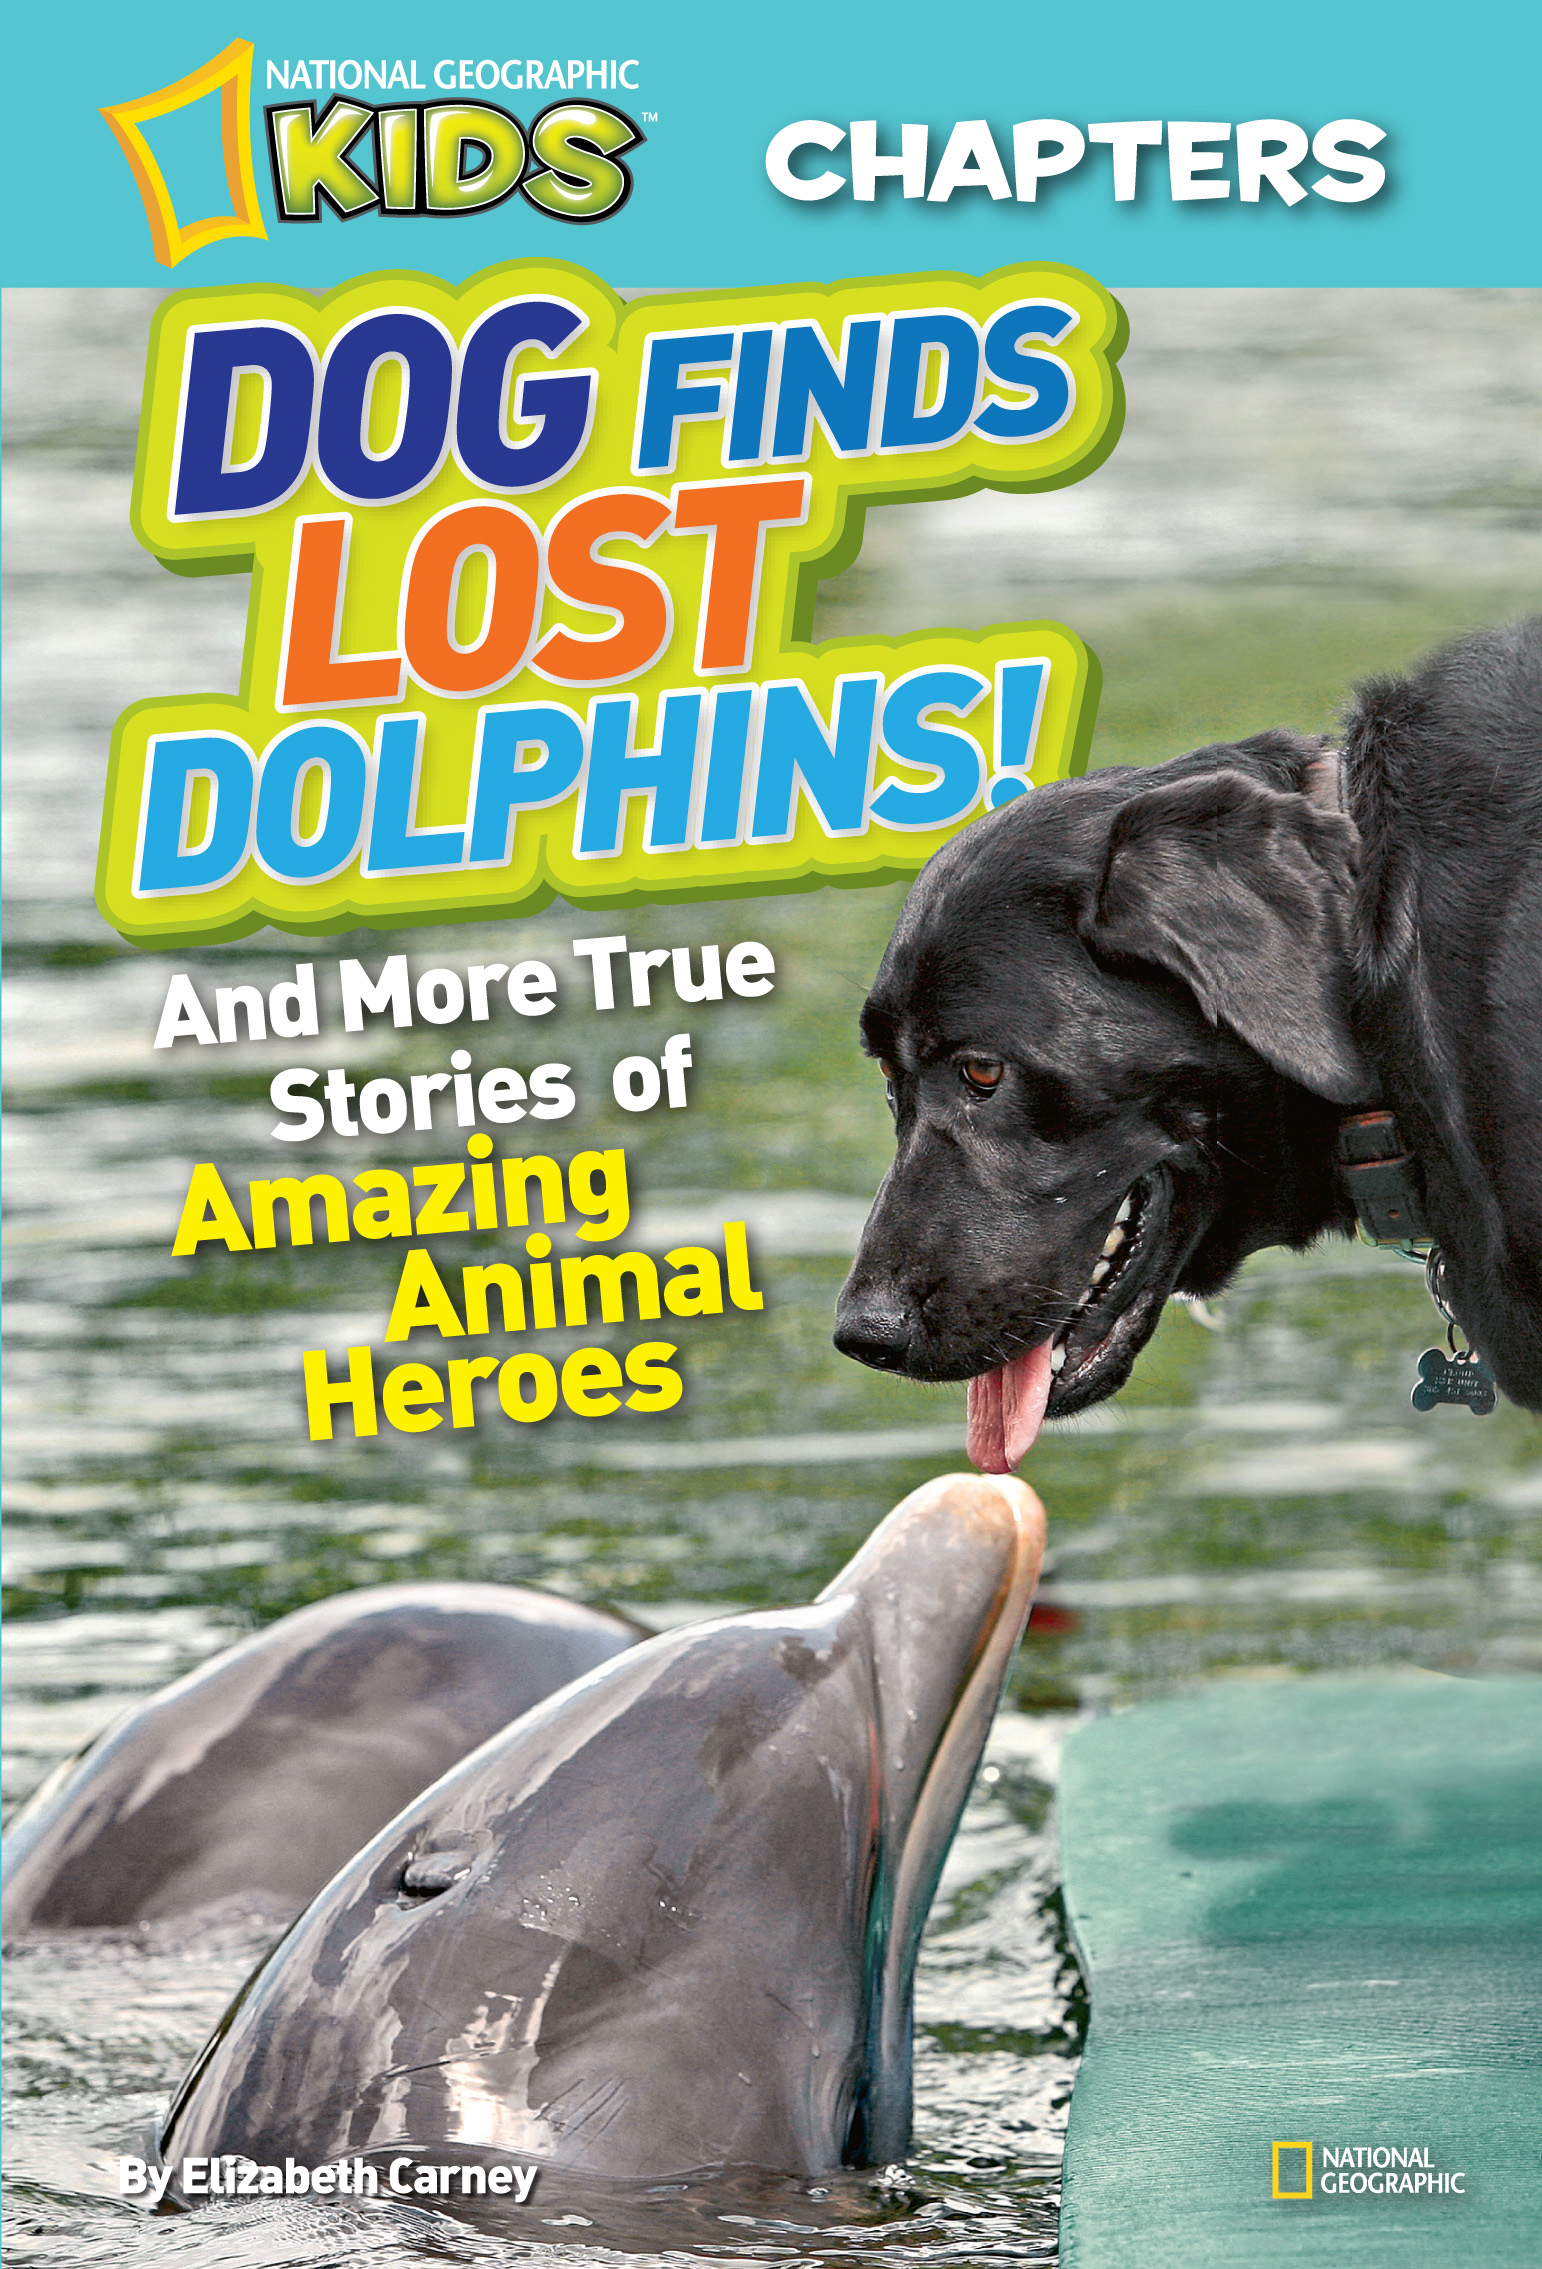 National Geographic kids chapters: dog finds lost dolphins And More True Stories of Amazing Animal Heroes cover image